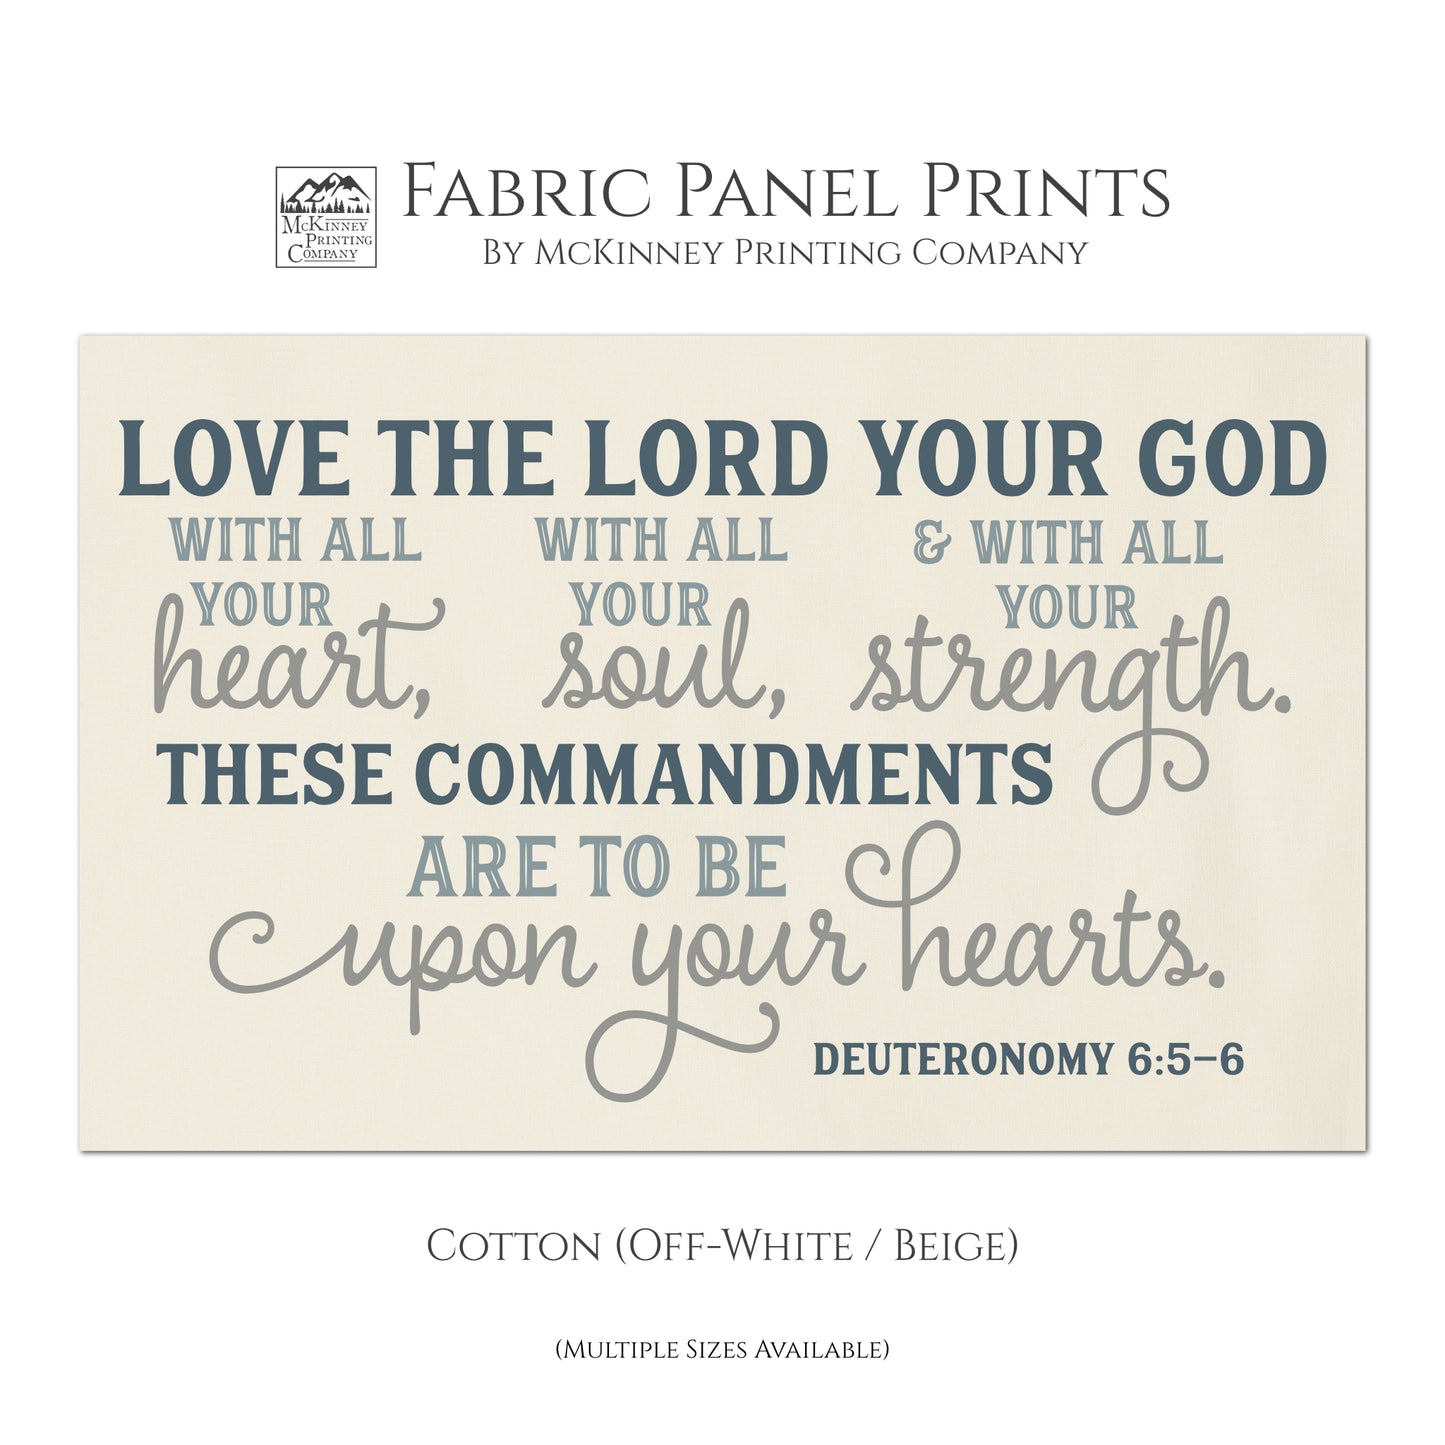 Love the Lord you God with all your heart, with all your soul and with all your strength. These commandments are to be written upon your hearts - Deuteronomy 6:5 - Scripture Fabric, Christian, Bible Verse, Quilting, Quilt - Cotton